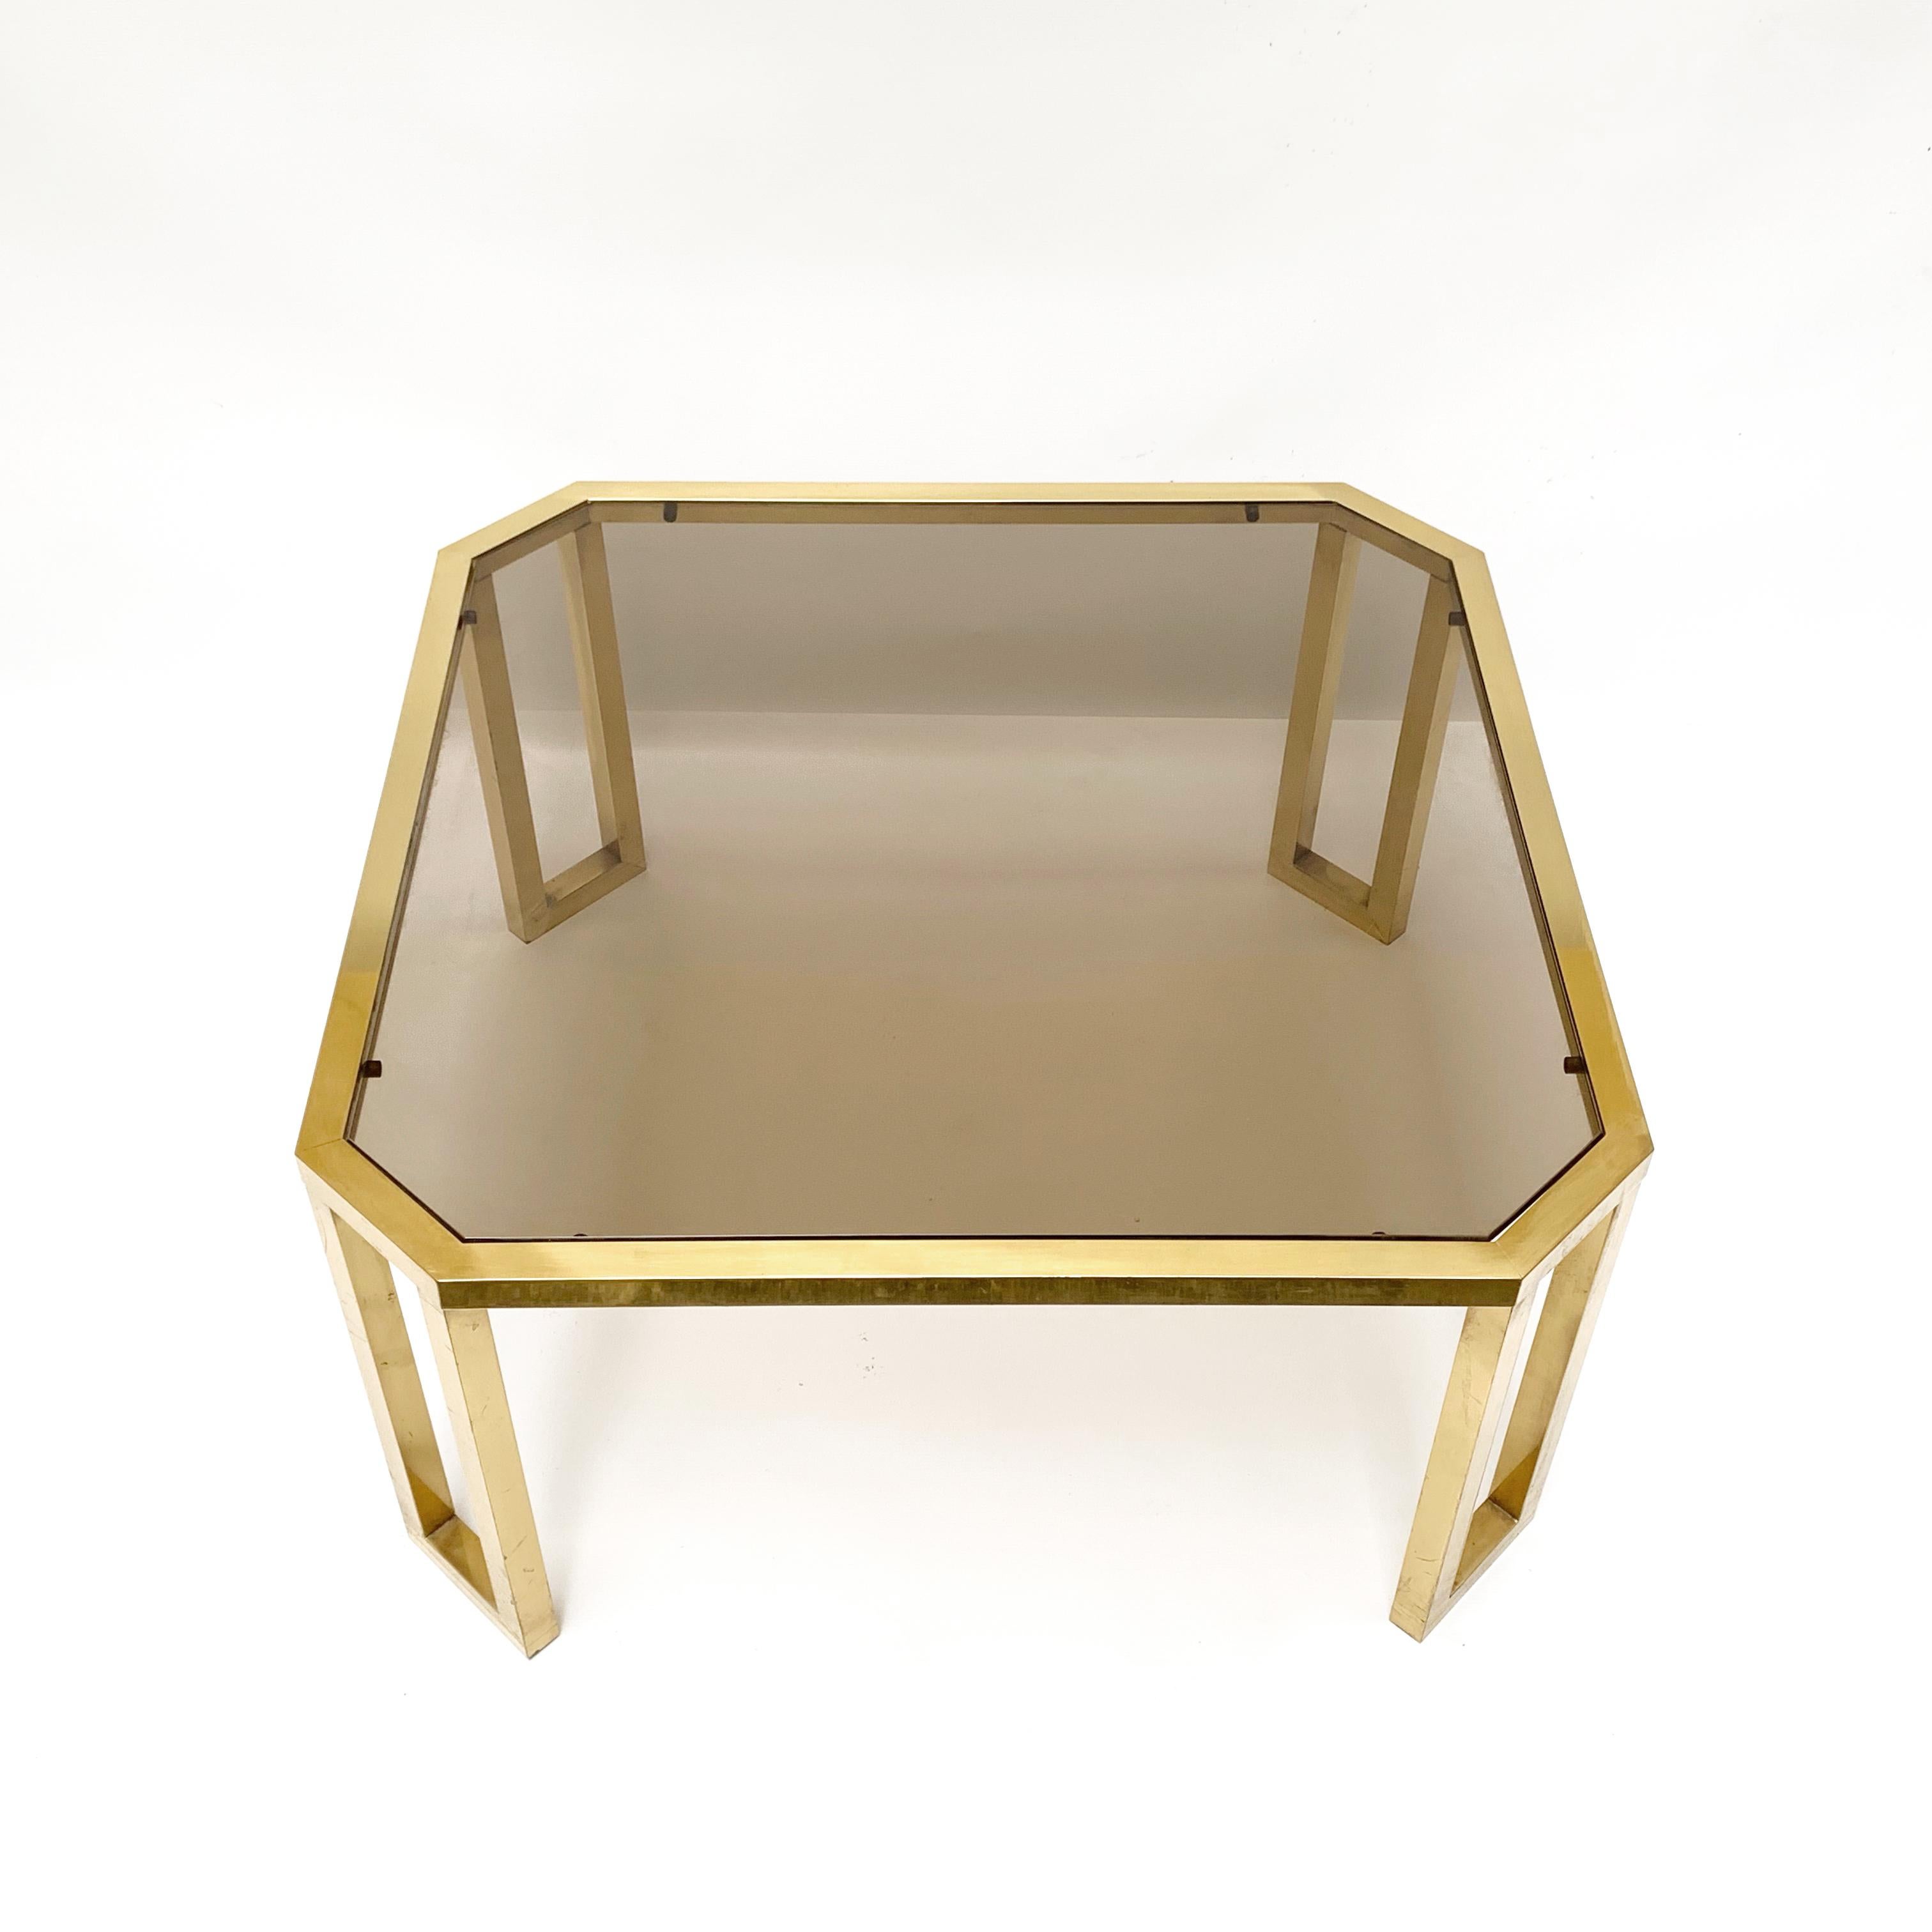 French Maison Jansen Octagonal Tables in Brass and Glass, France, 1970s Coffee Tables For Sale